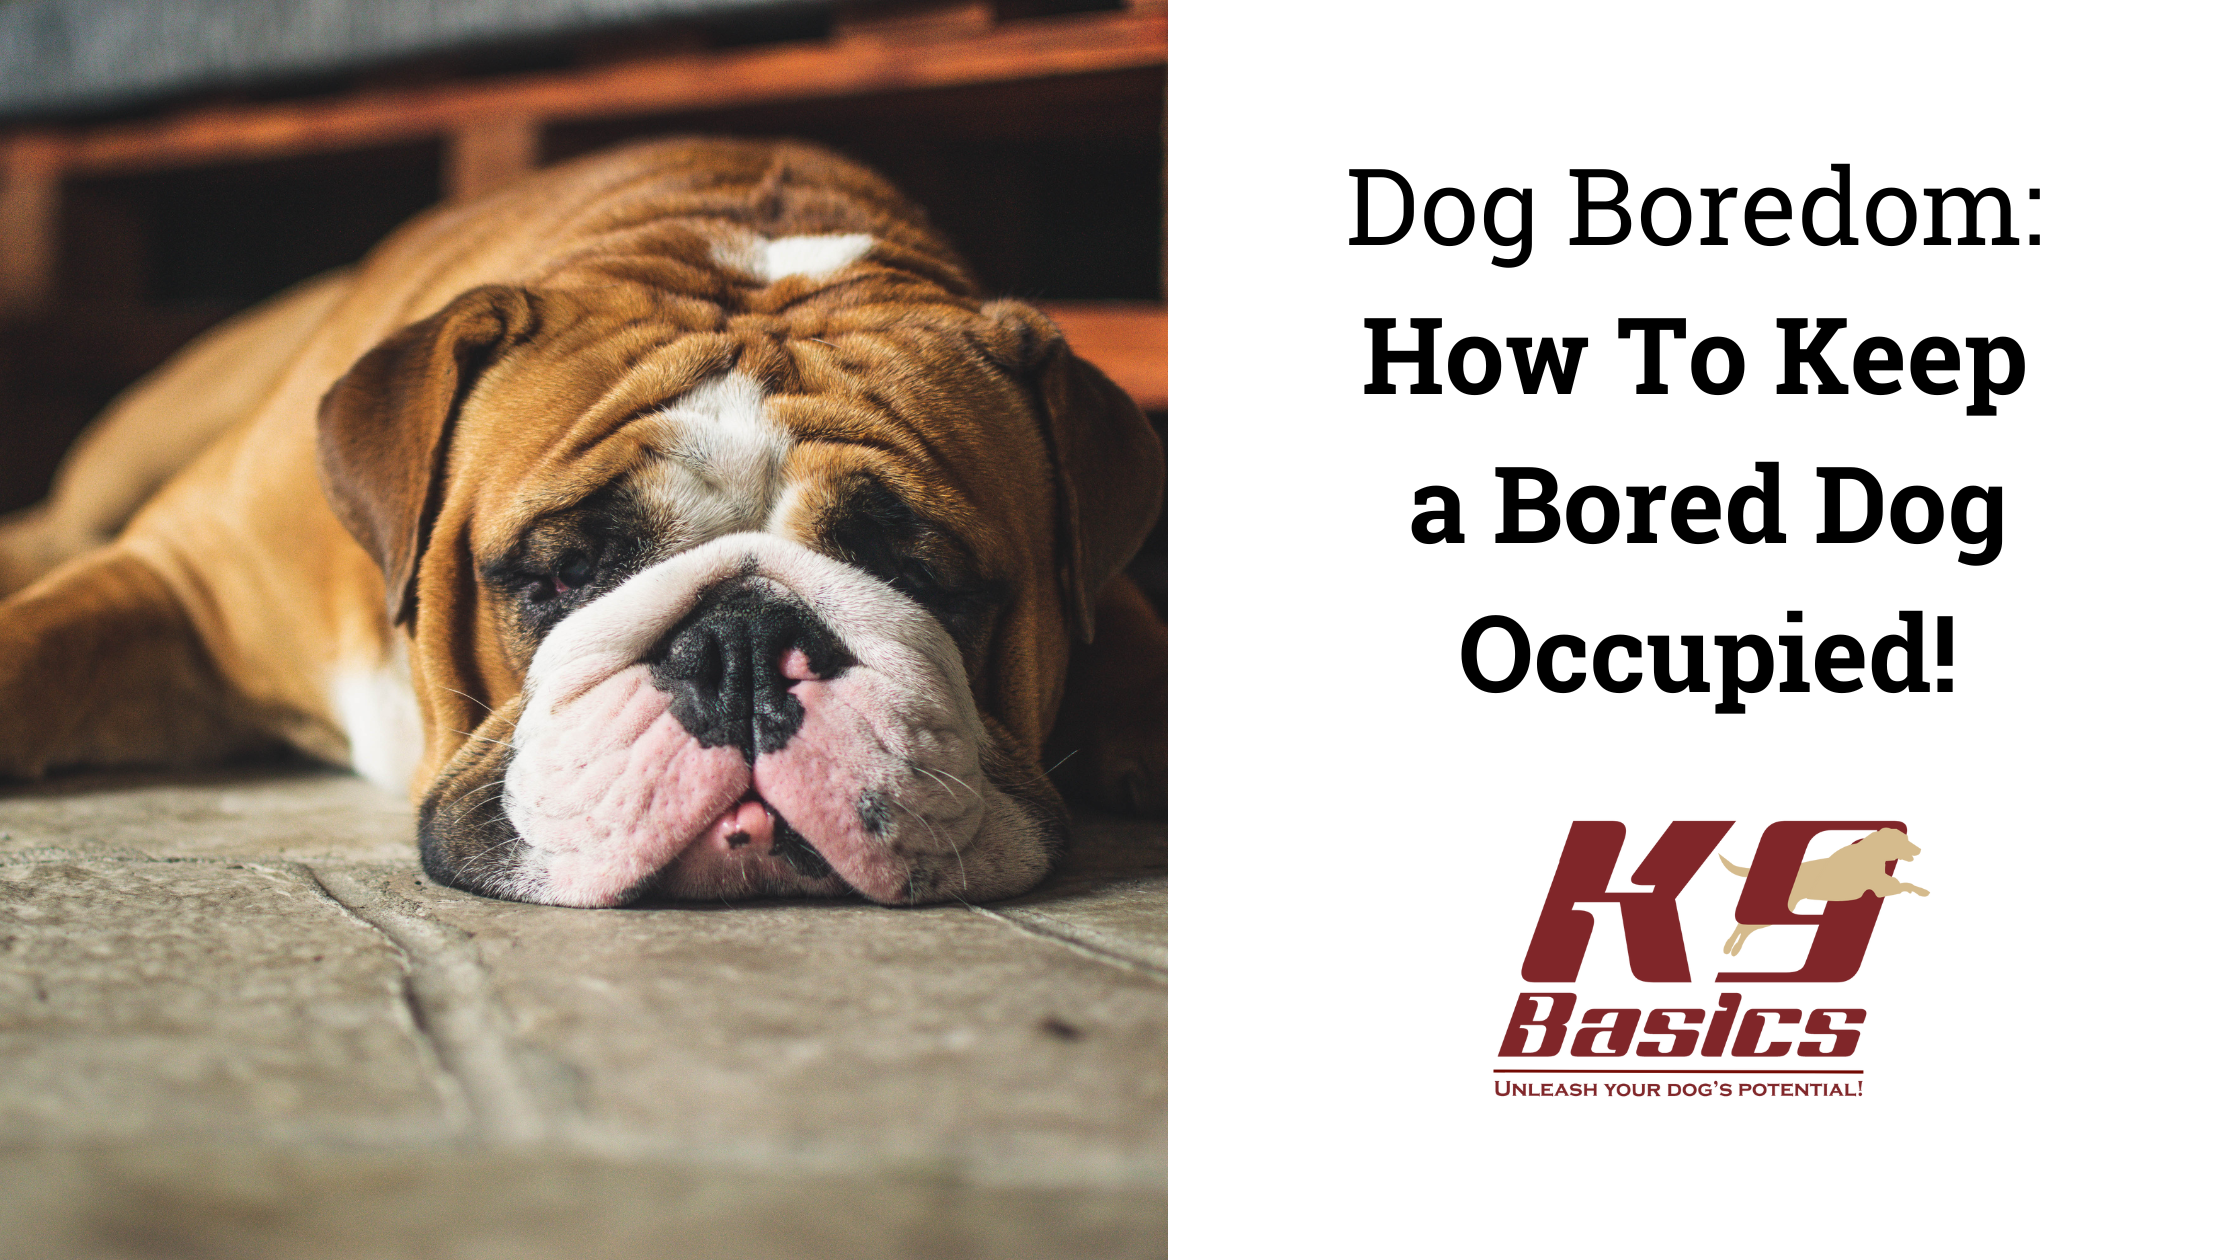 How to Keep a Bored Dog Occupied